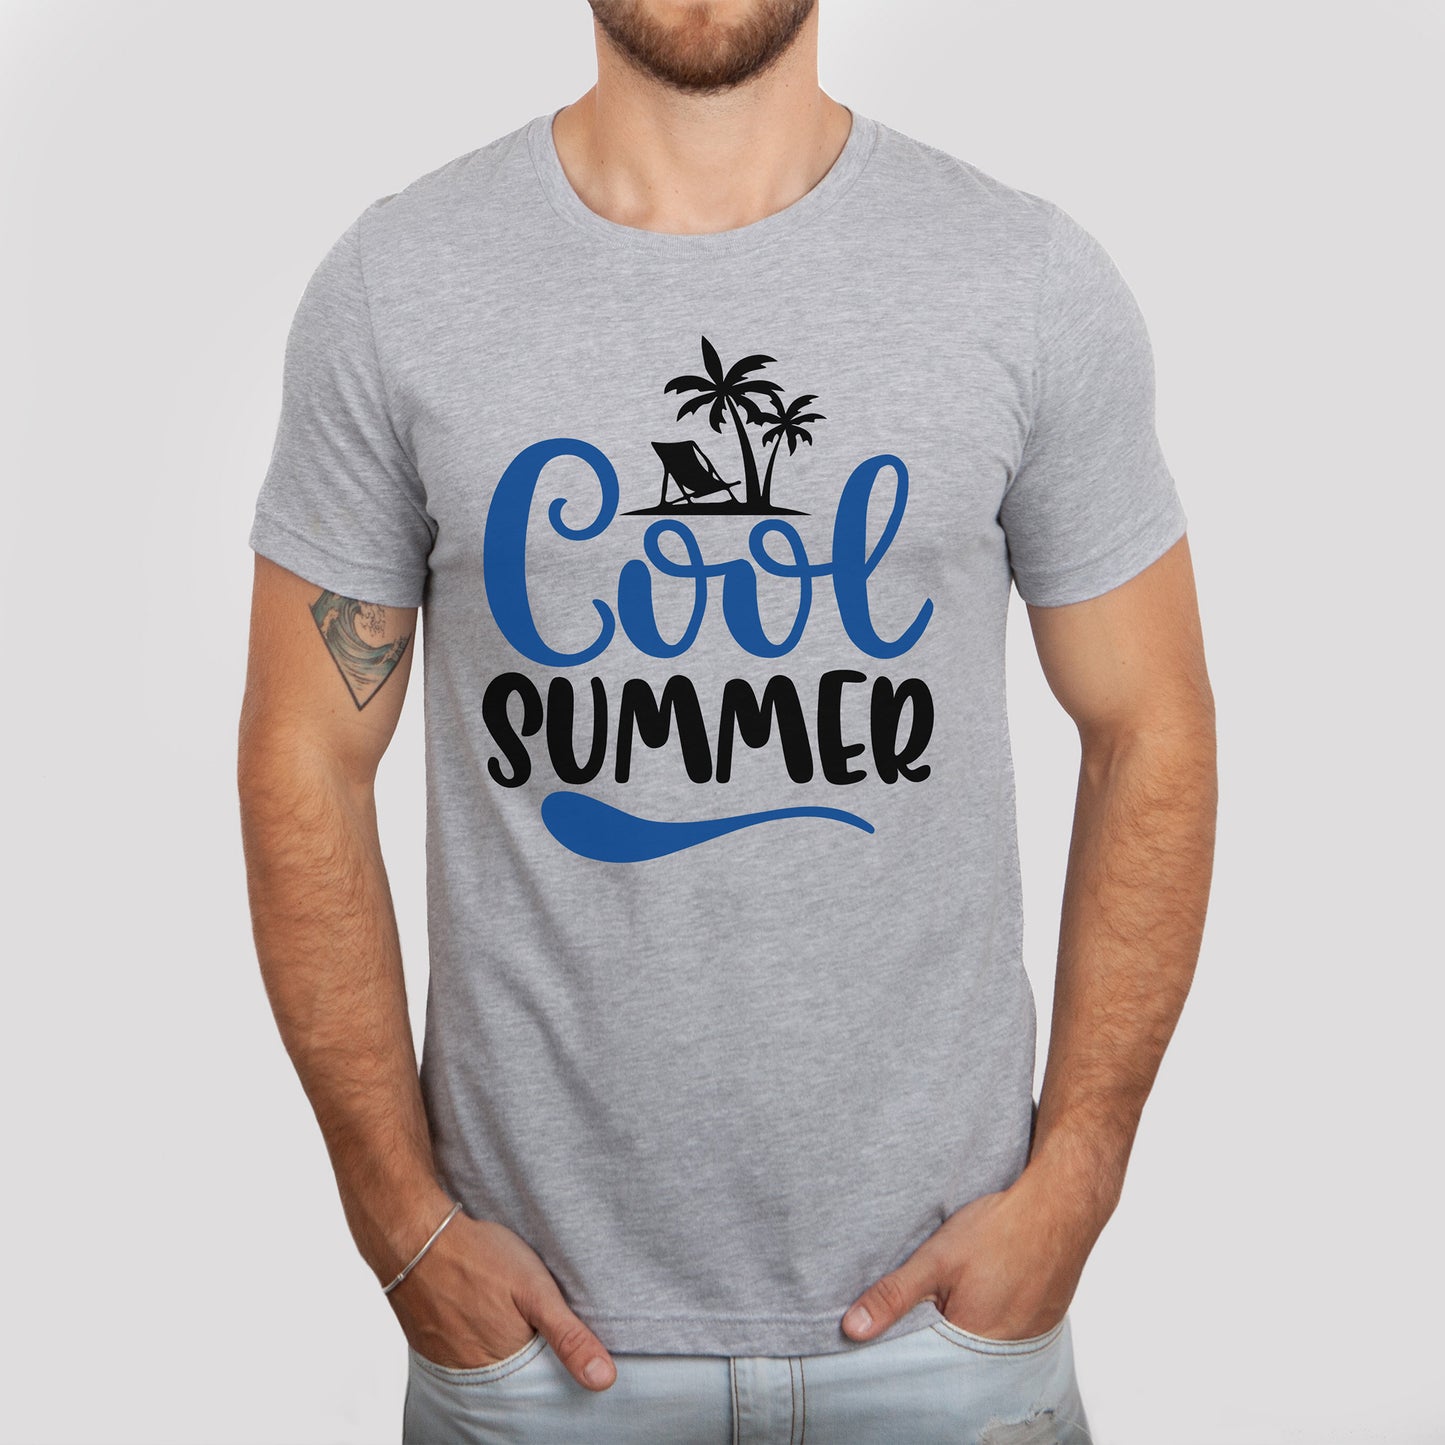 "Cool Summer" Graphic